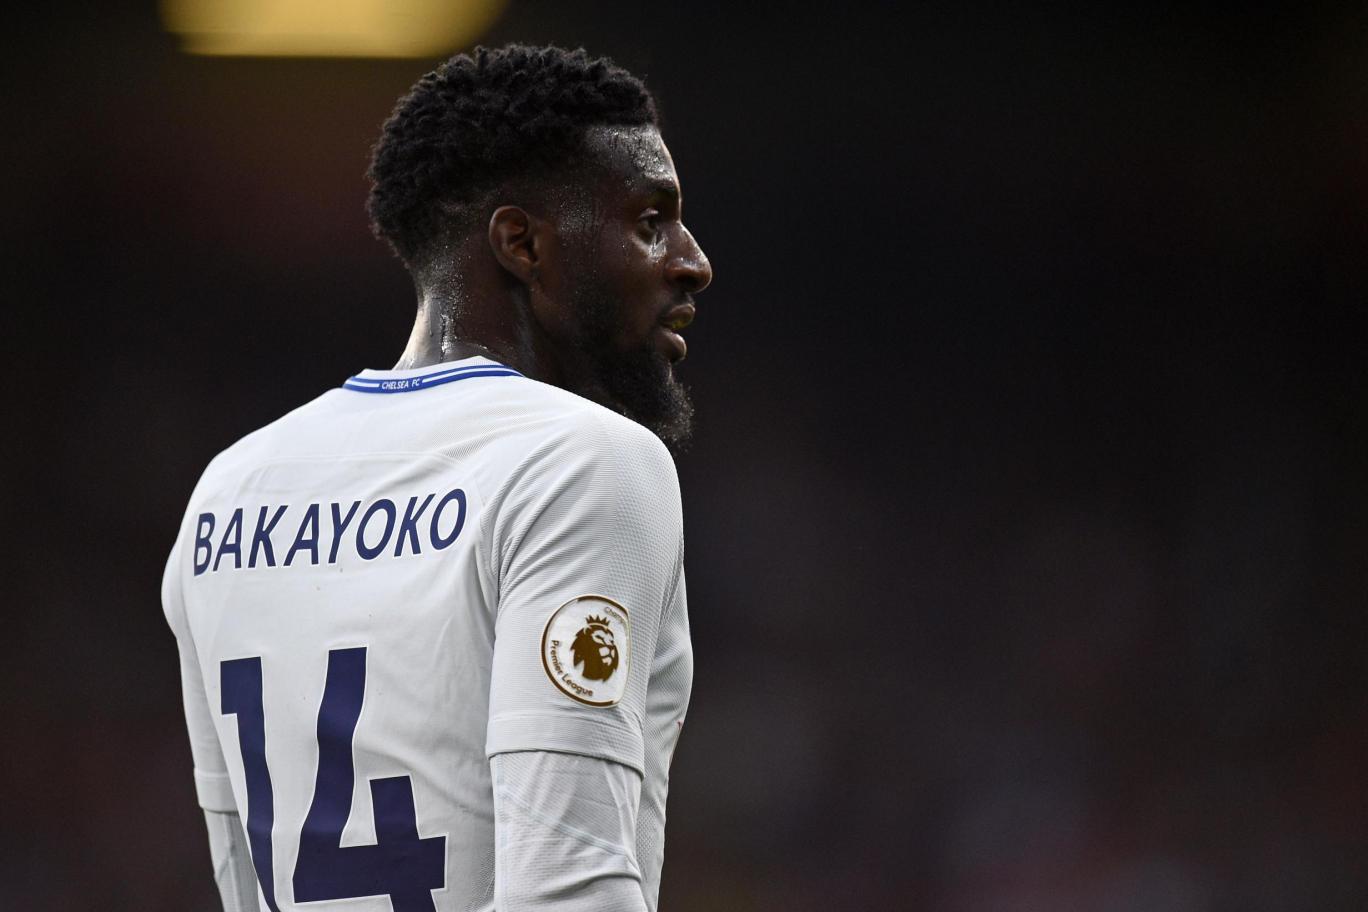 Bakayoko joined Chelsea in 2017 but has been loaned out multiple times to Serie A clubs since then.